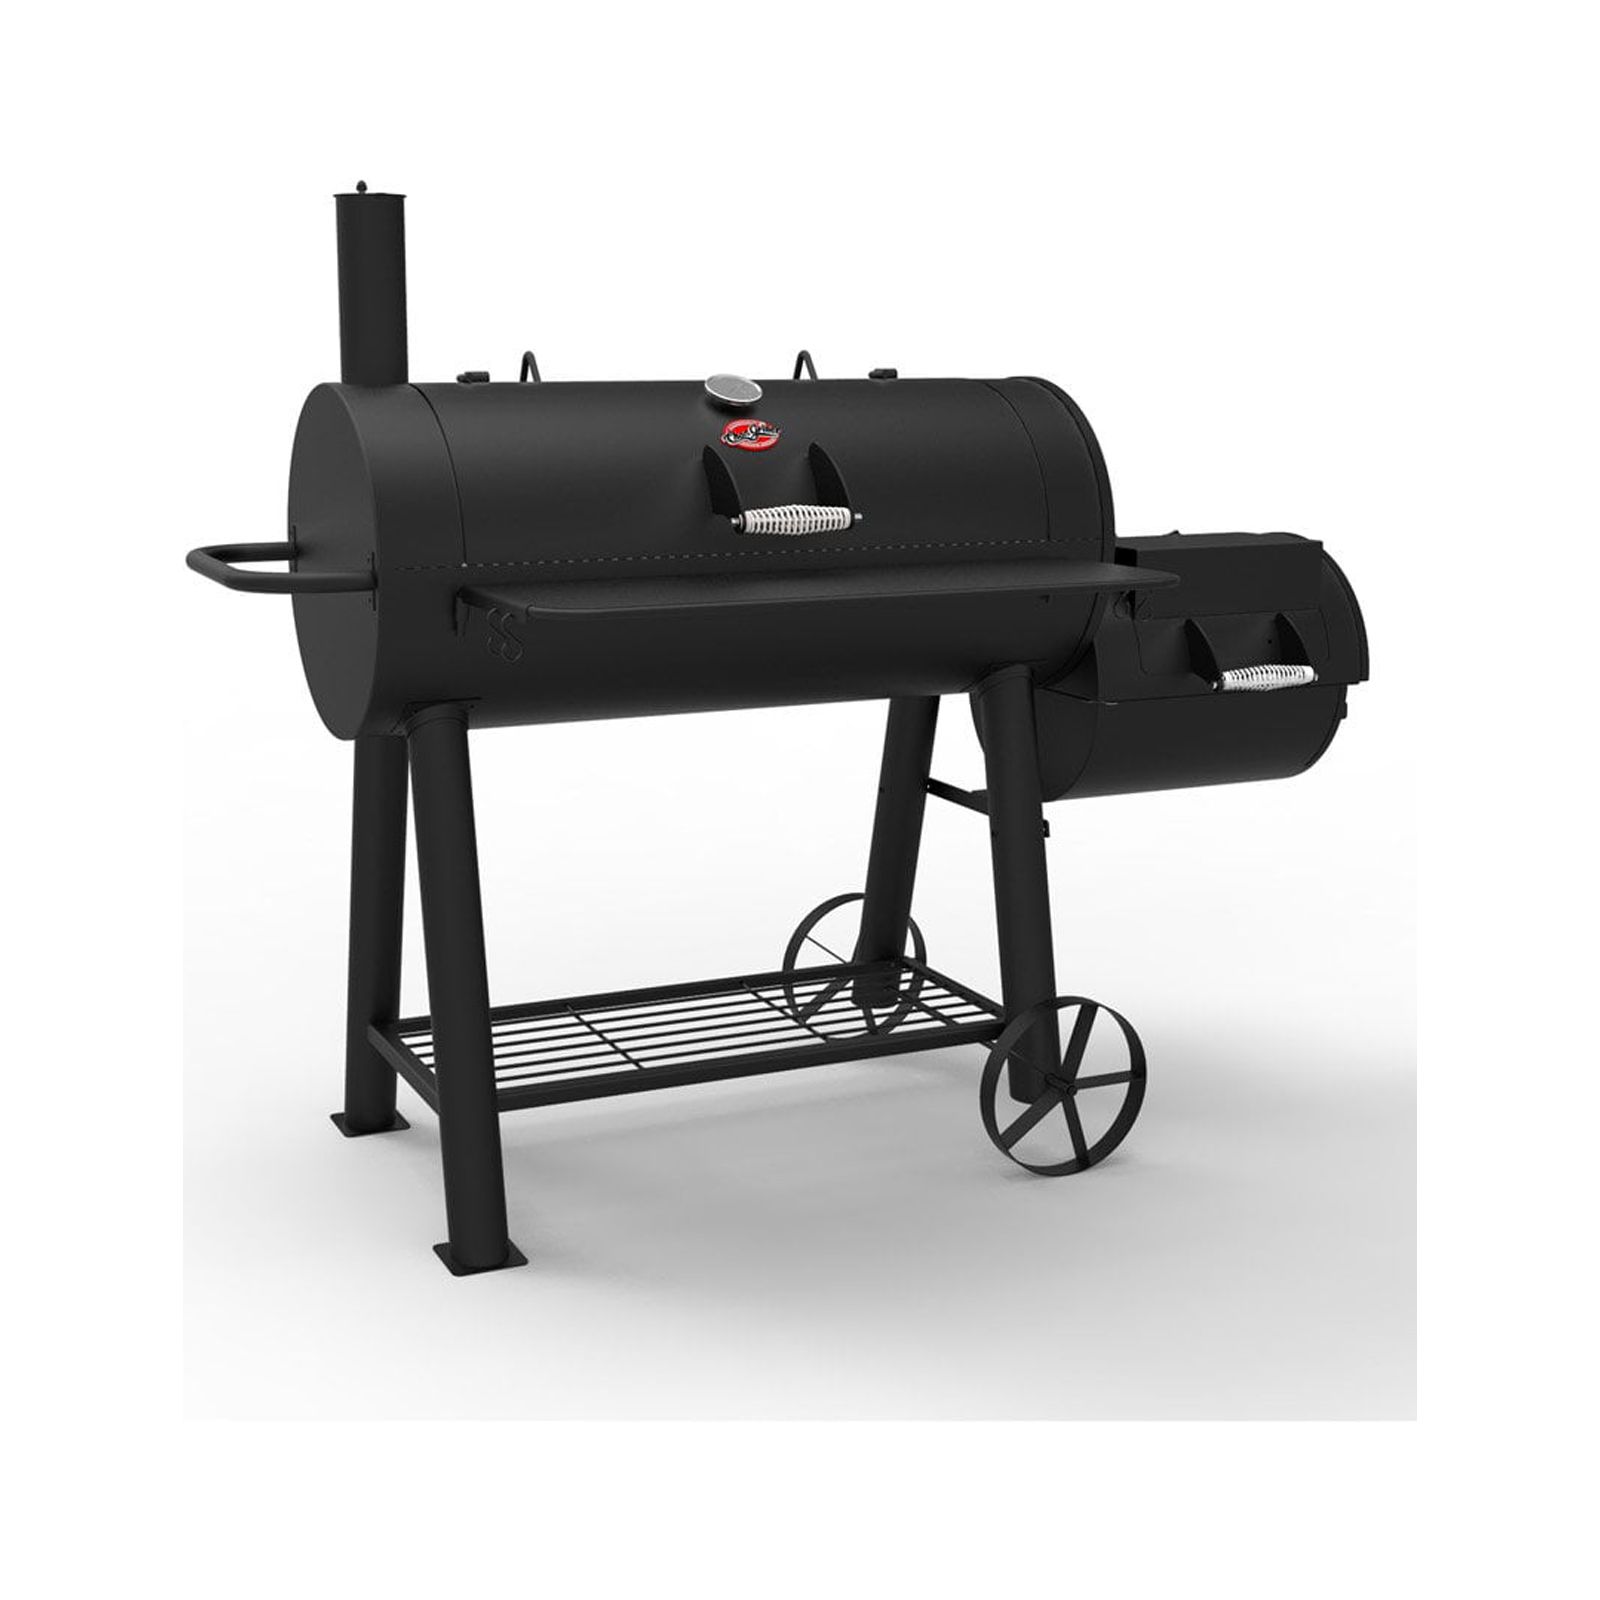 Char-Griller Competition Pro 8125 Charcoal Grill - image 1 of 4